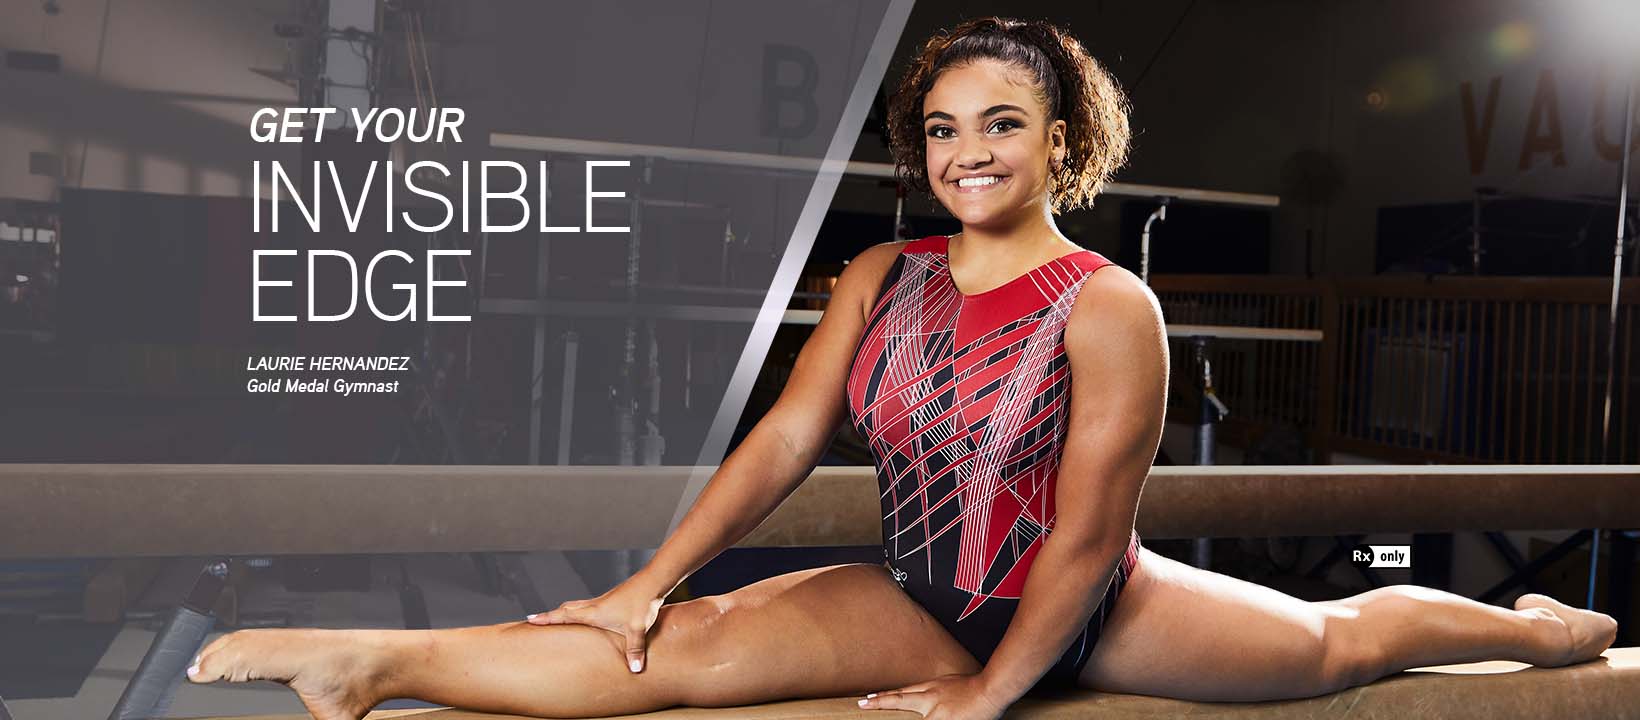 Laurie Hernandez, Olympic Gold- and Silver- Medalist Gymnast